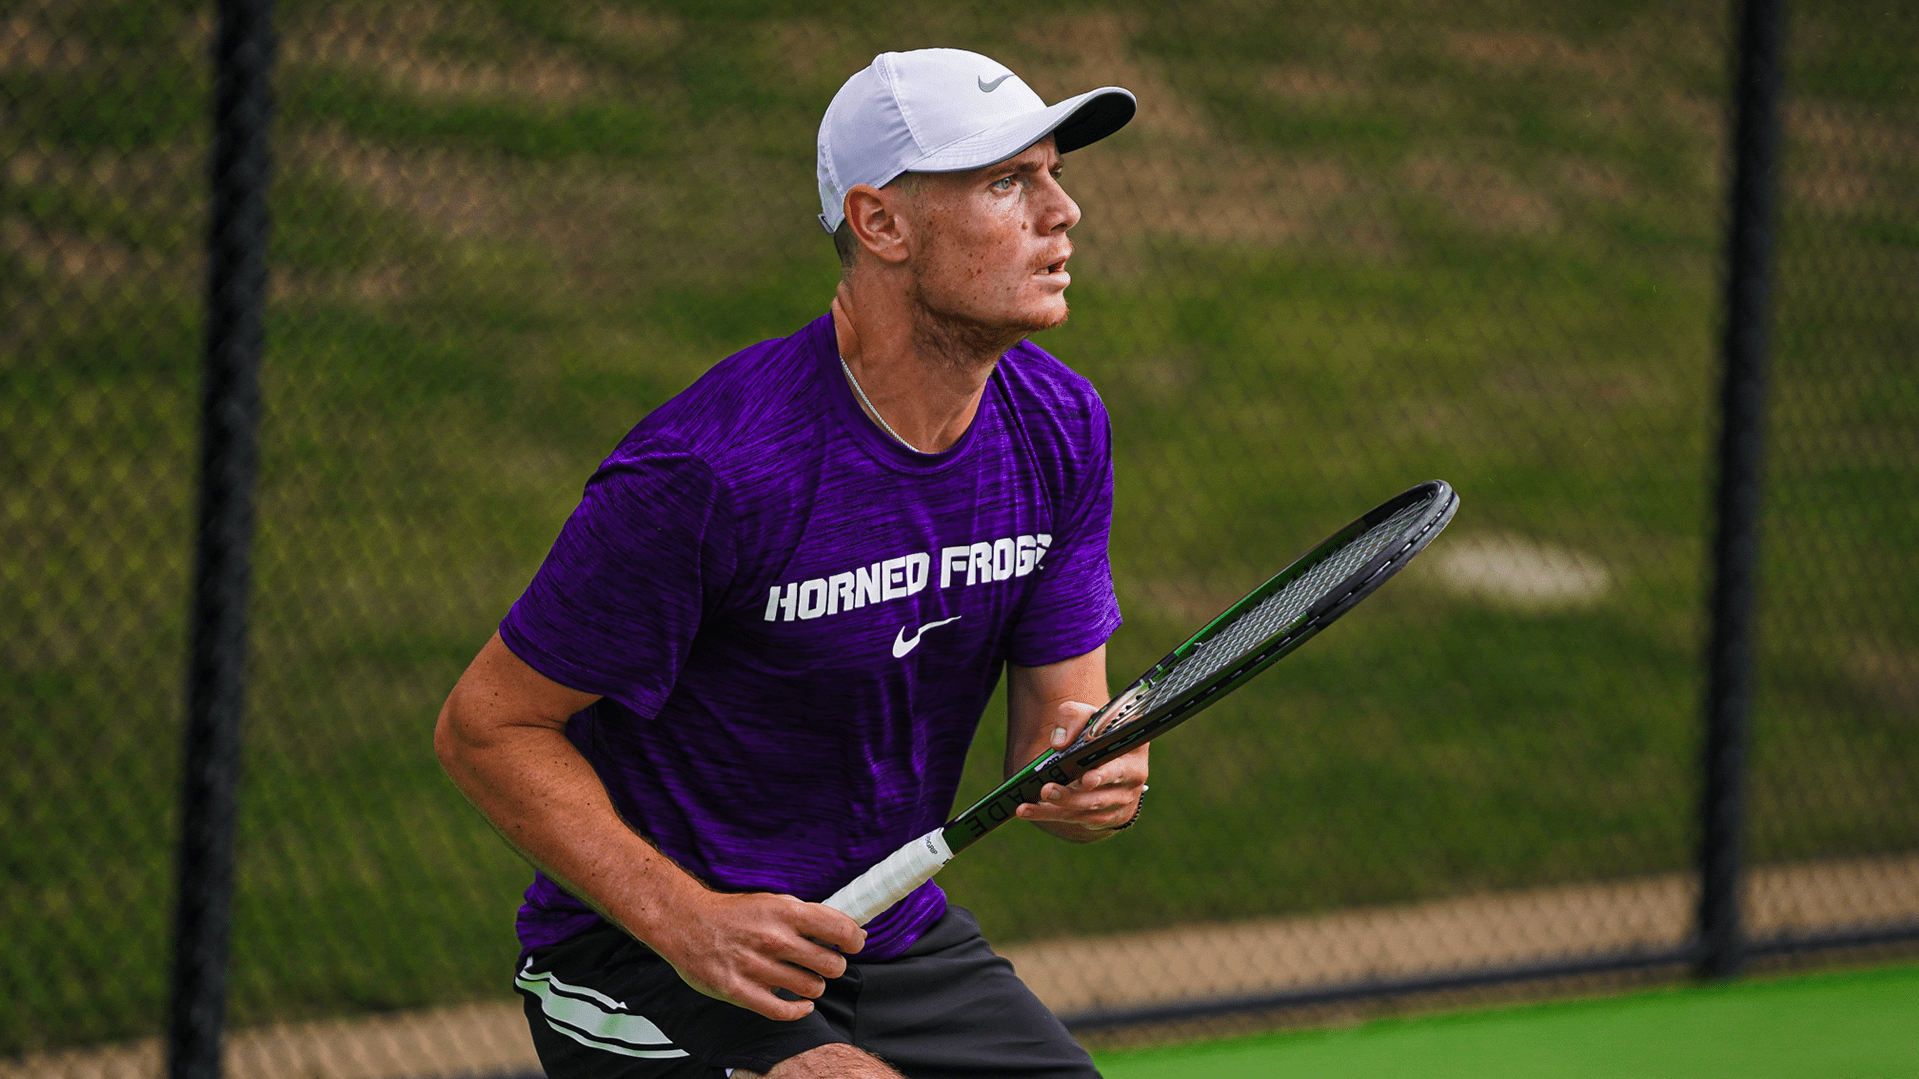 TCU Horned Frogs to Defend Big 12 Tennis Title: Schedule & Matches